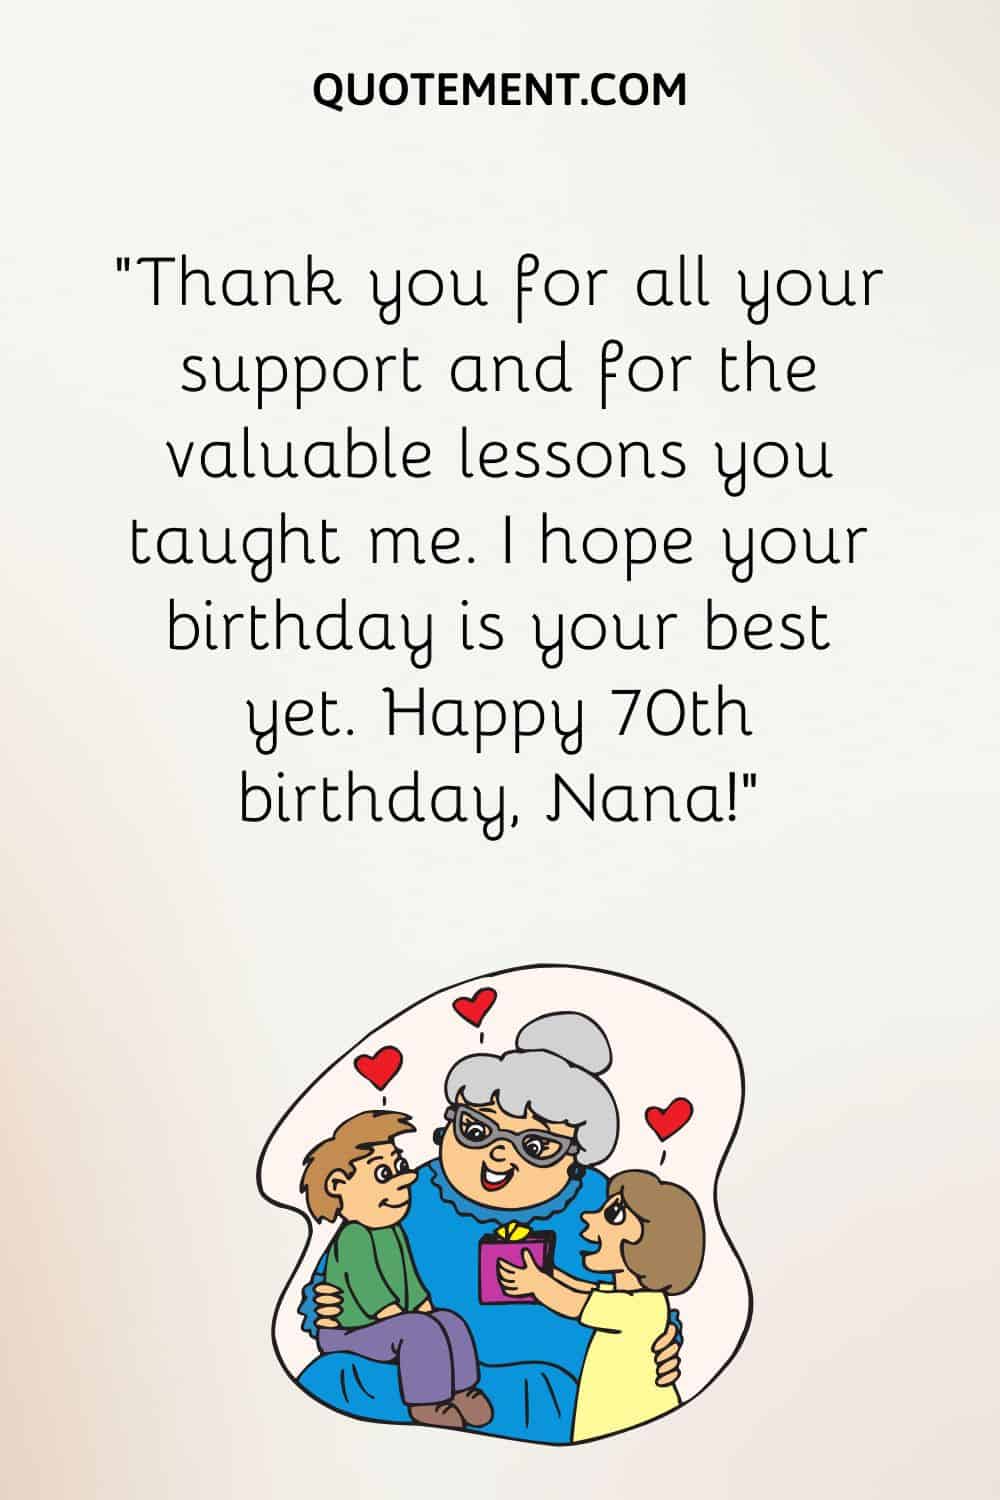 “Thank you for all your support and for the valuable lessons you taught me. I hope your birthday is your best yet. Happy 70th birthday, Nana!”